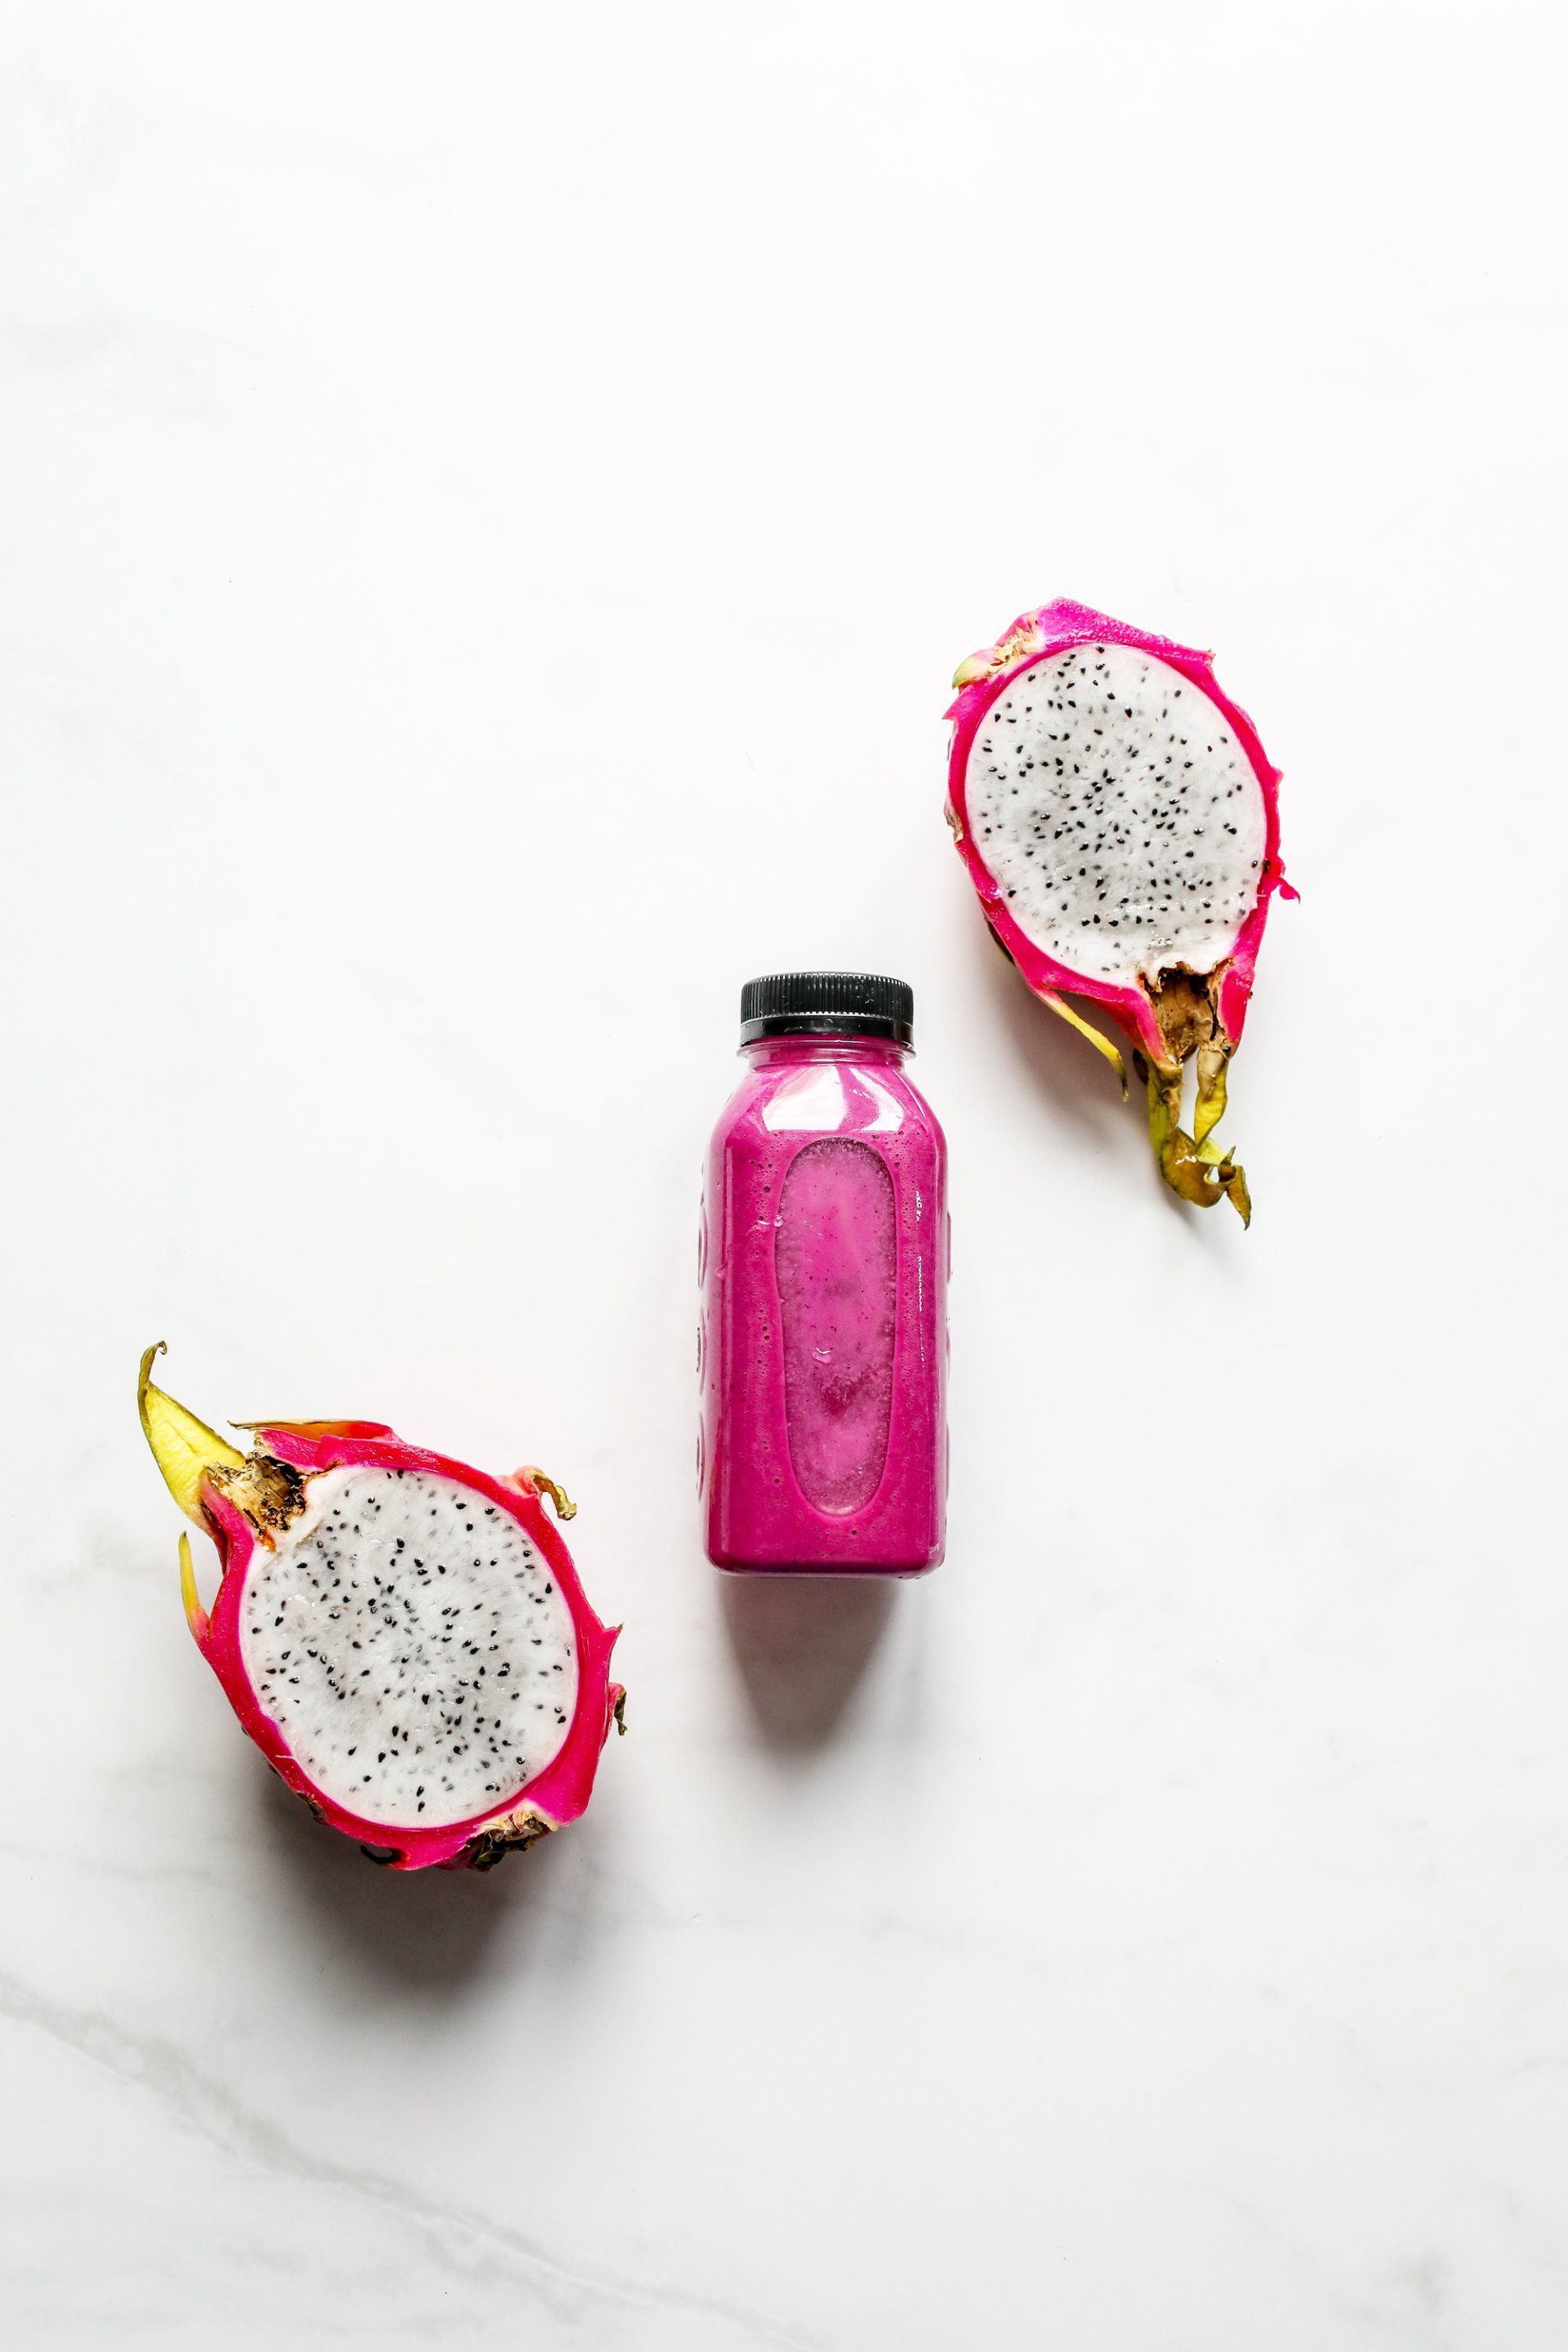 Two dragon fruits and a bottle of dragon fruit juice on a white surface.